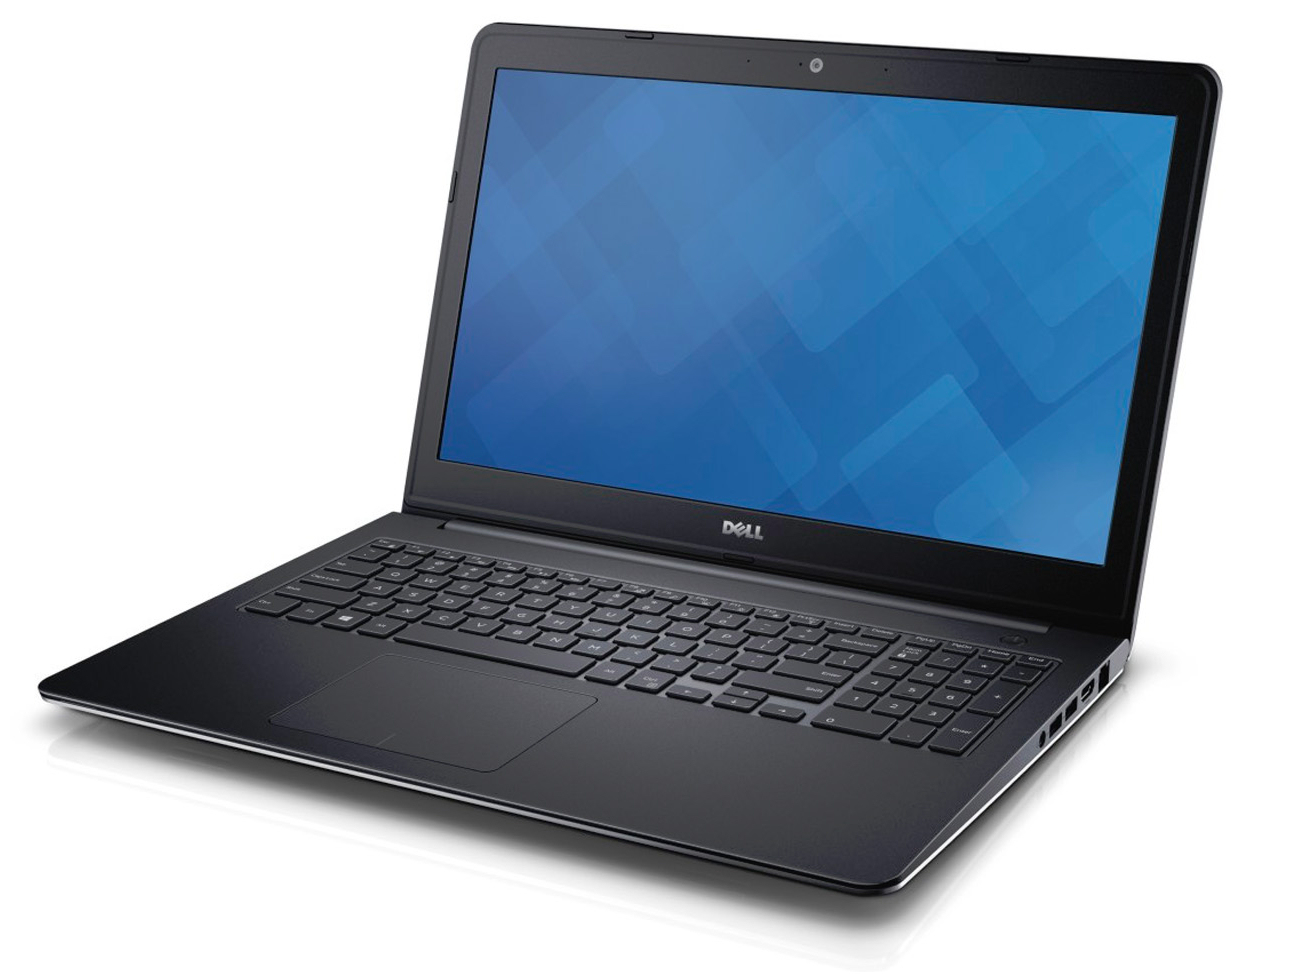  Dell Inspiron 15 5548 Notebook Review NotebookCheck net 